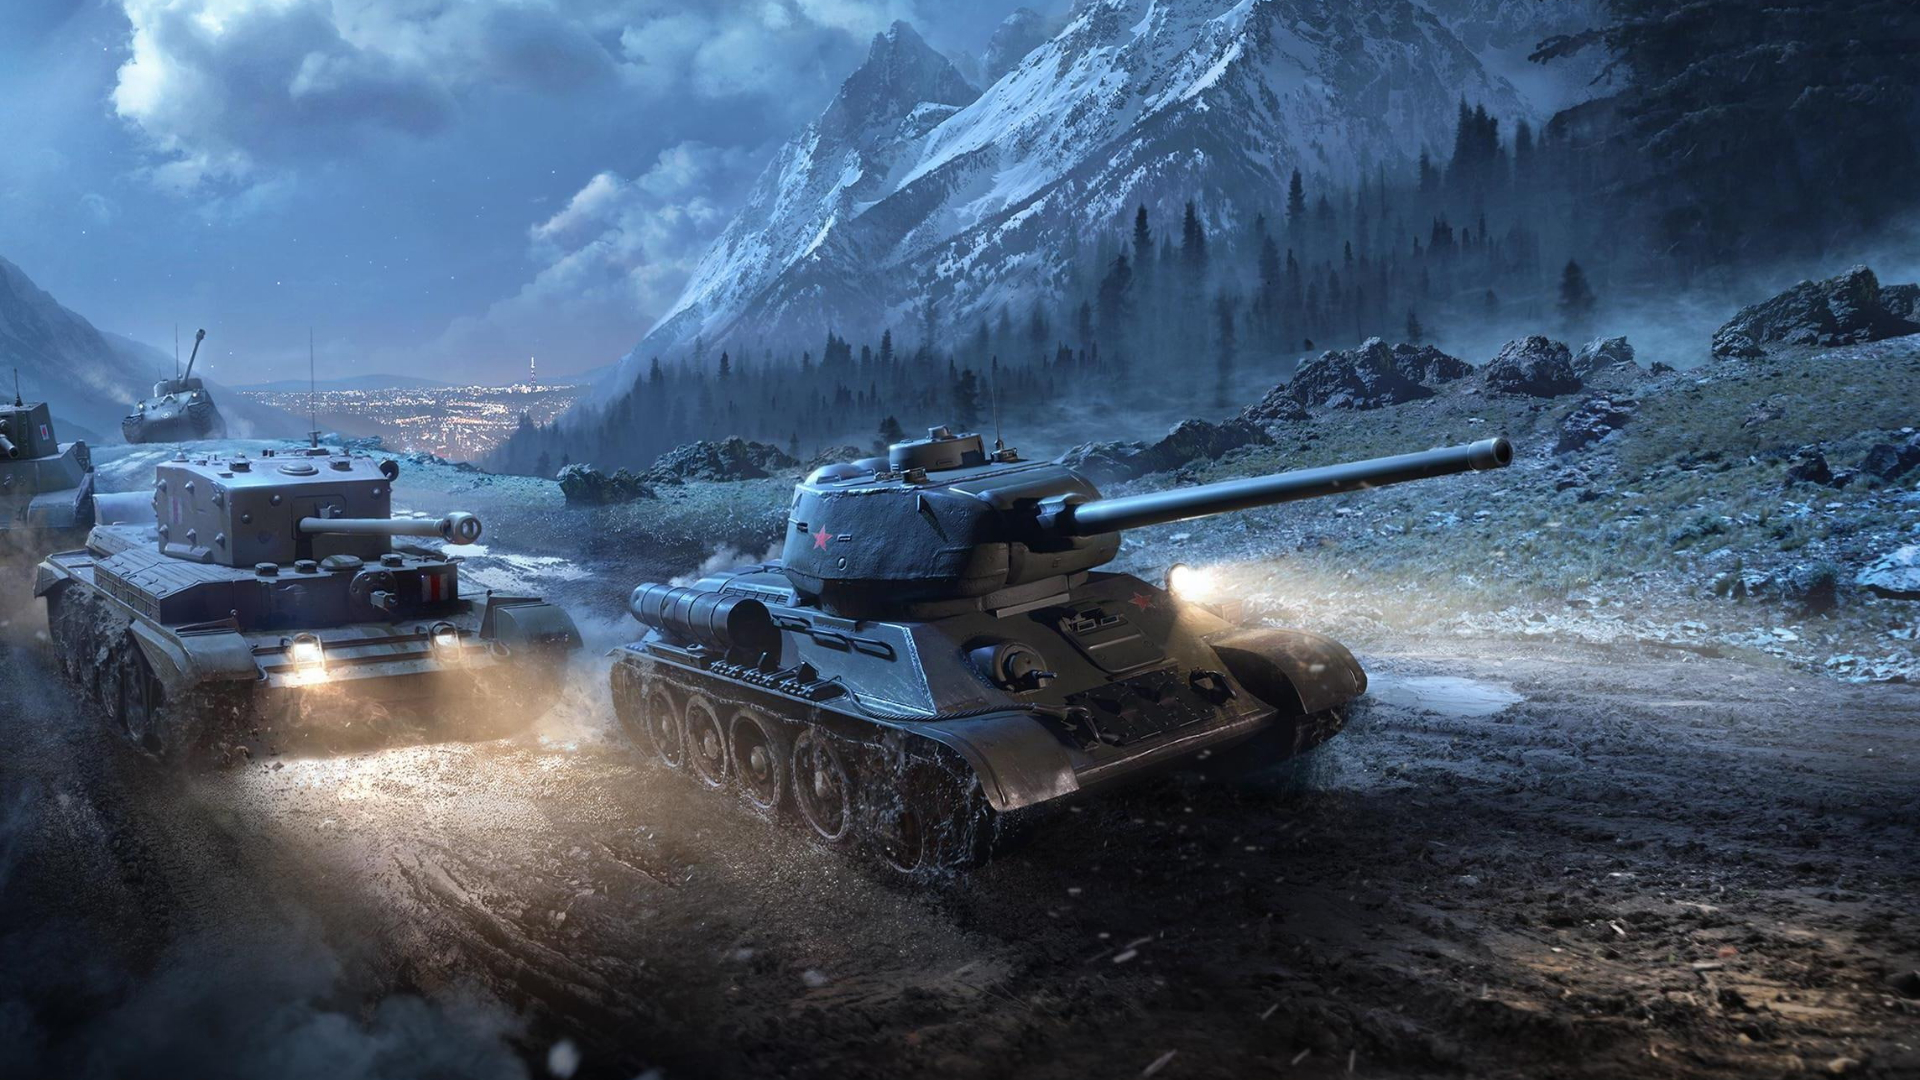 How to play World of Tanks correctly